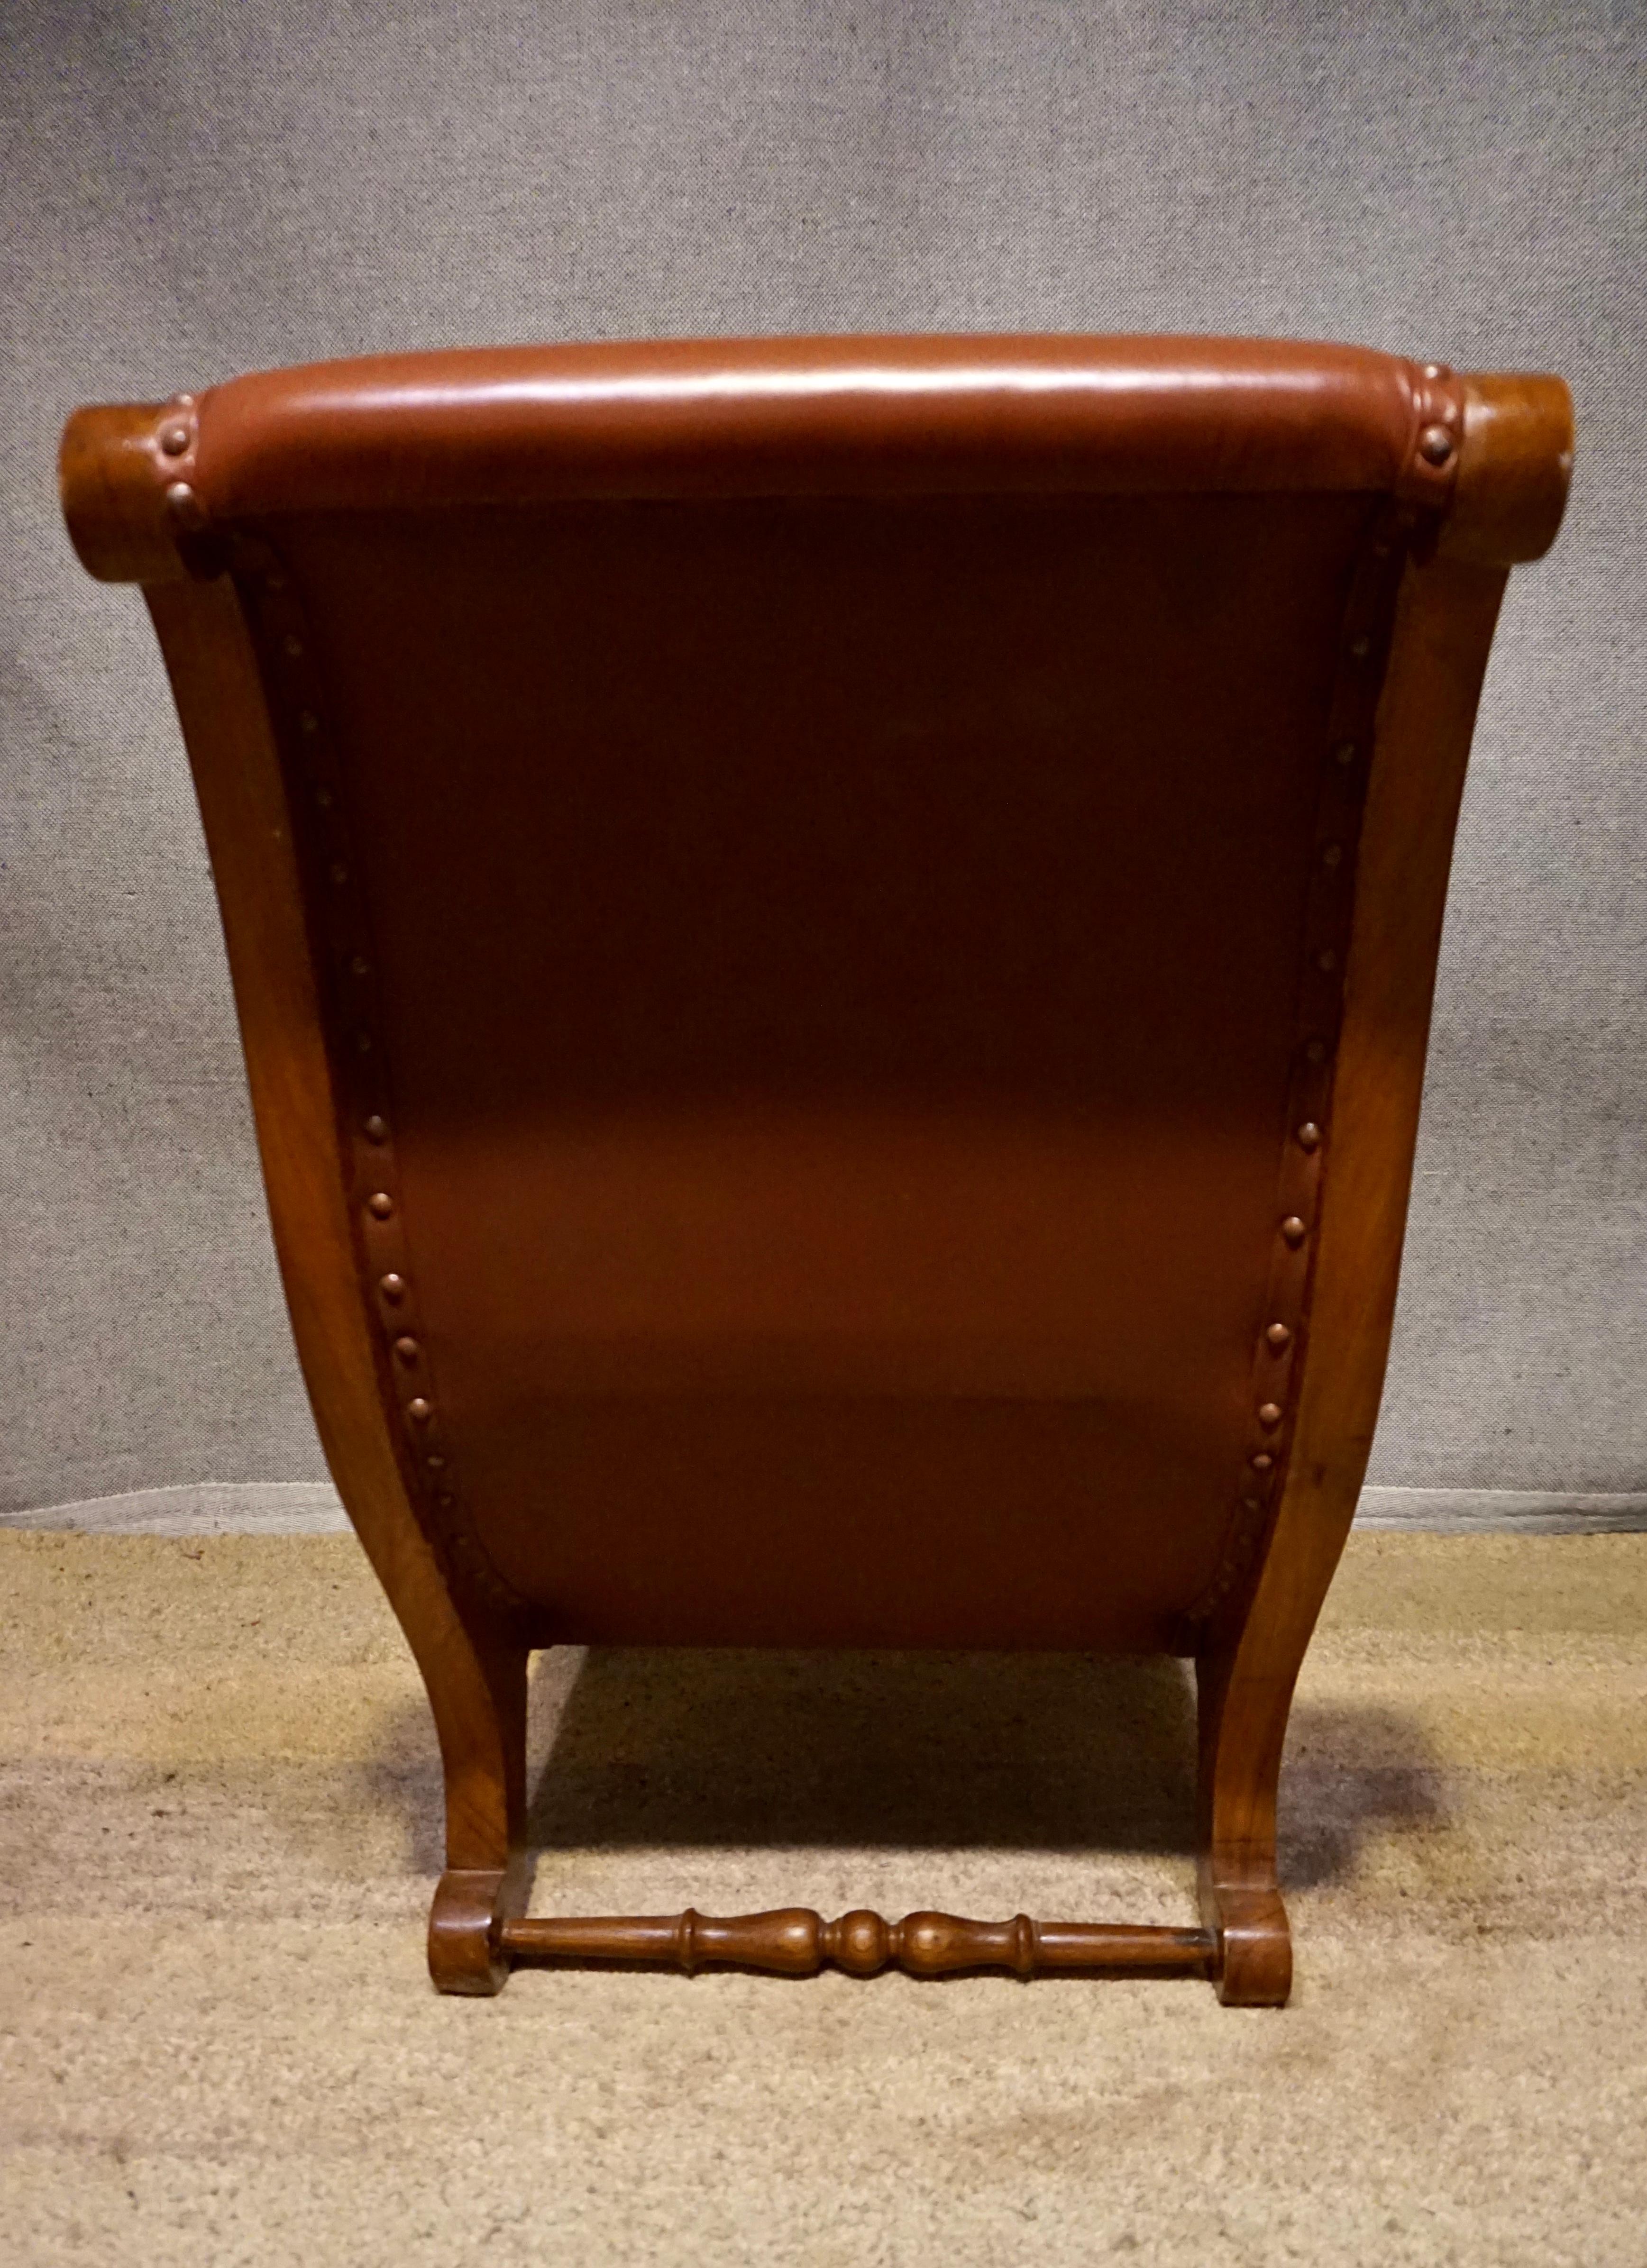 Early 20th Century British Colonial Teak Slipper Chair With Leather Upholstery For Sale